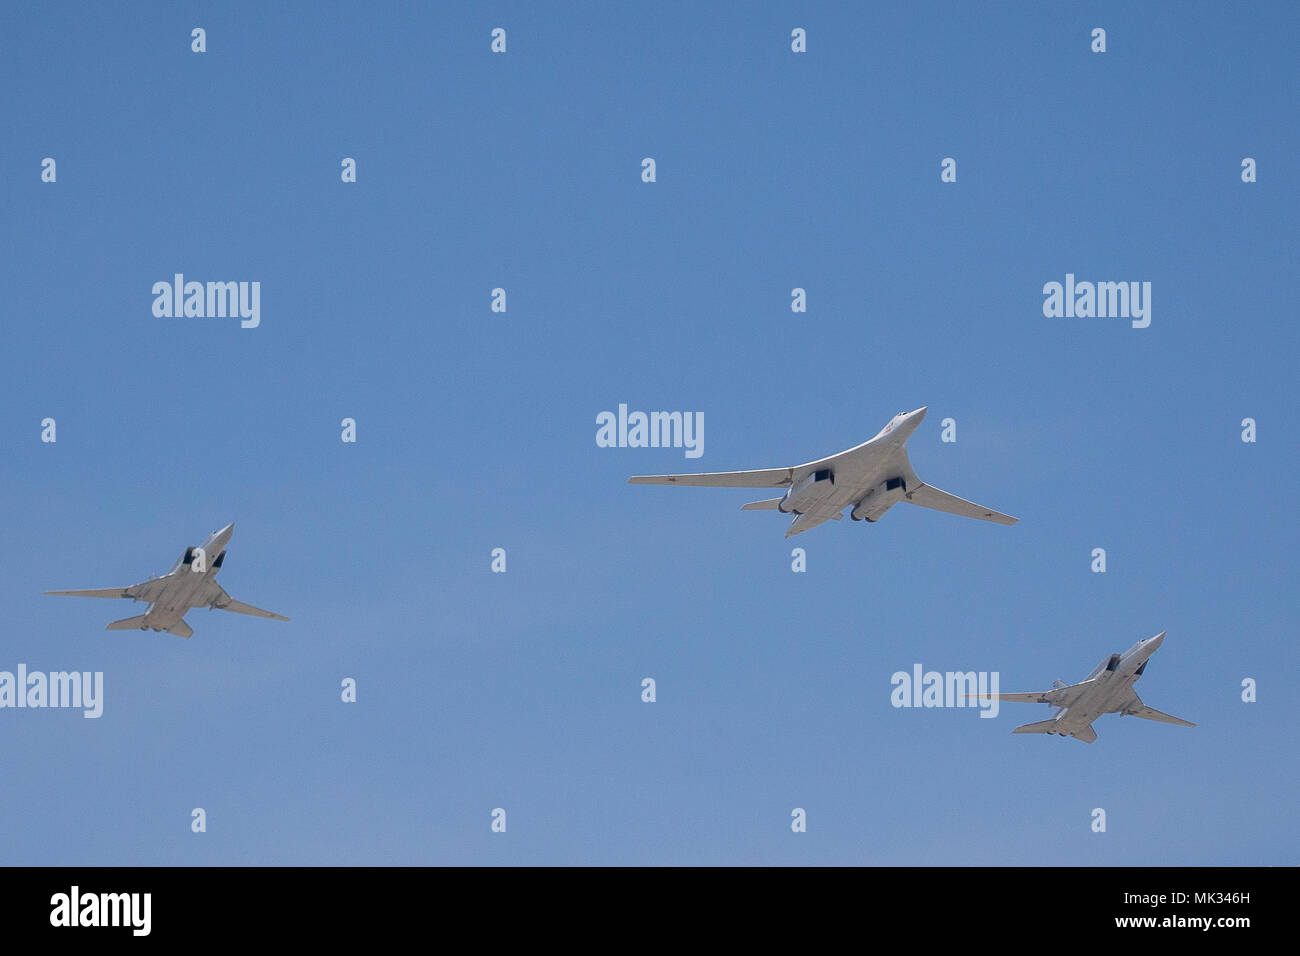 Moscow, Russia. 4th May, 2018. Russian Air Force Tupolev Tu-160 strategic bomber and a Tupolev Tu-22M3 strike bomber aircraft fly in formation during a rehearsal of the upcoming Victory Day air show marking the 73rd anniversary of the victory over Nazi Germany in the 1941-45 Great Patriotic War, the Eastern Front of World War II. Credit: Victor Vytolskiy/Alamy Live News Stock Photo